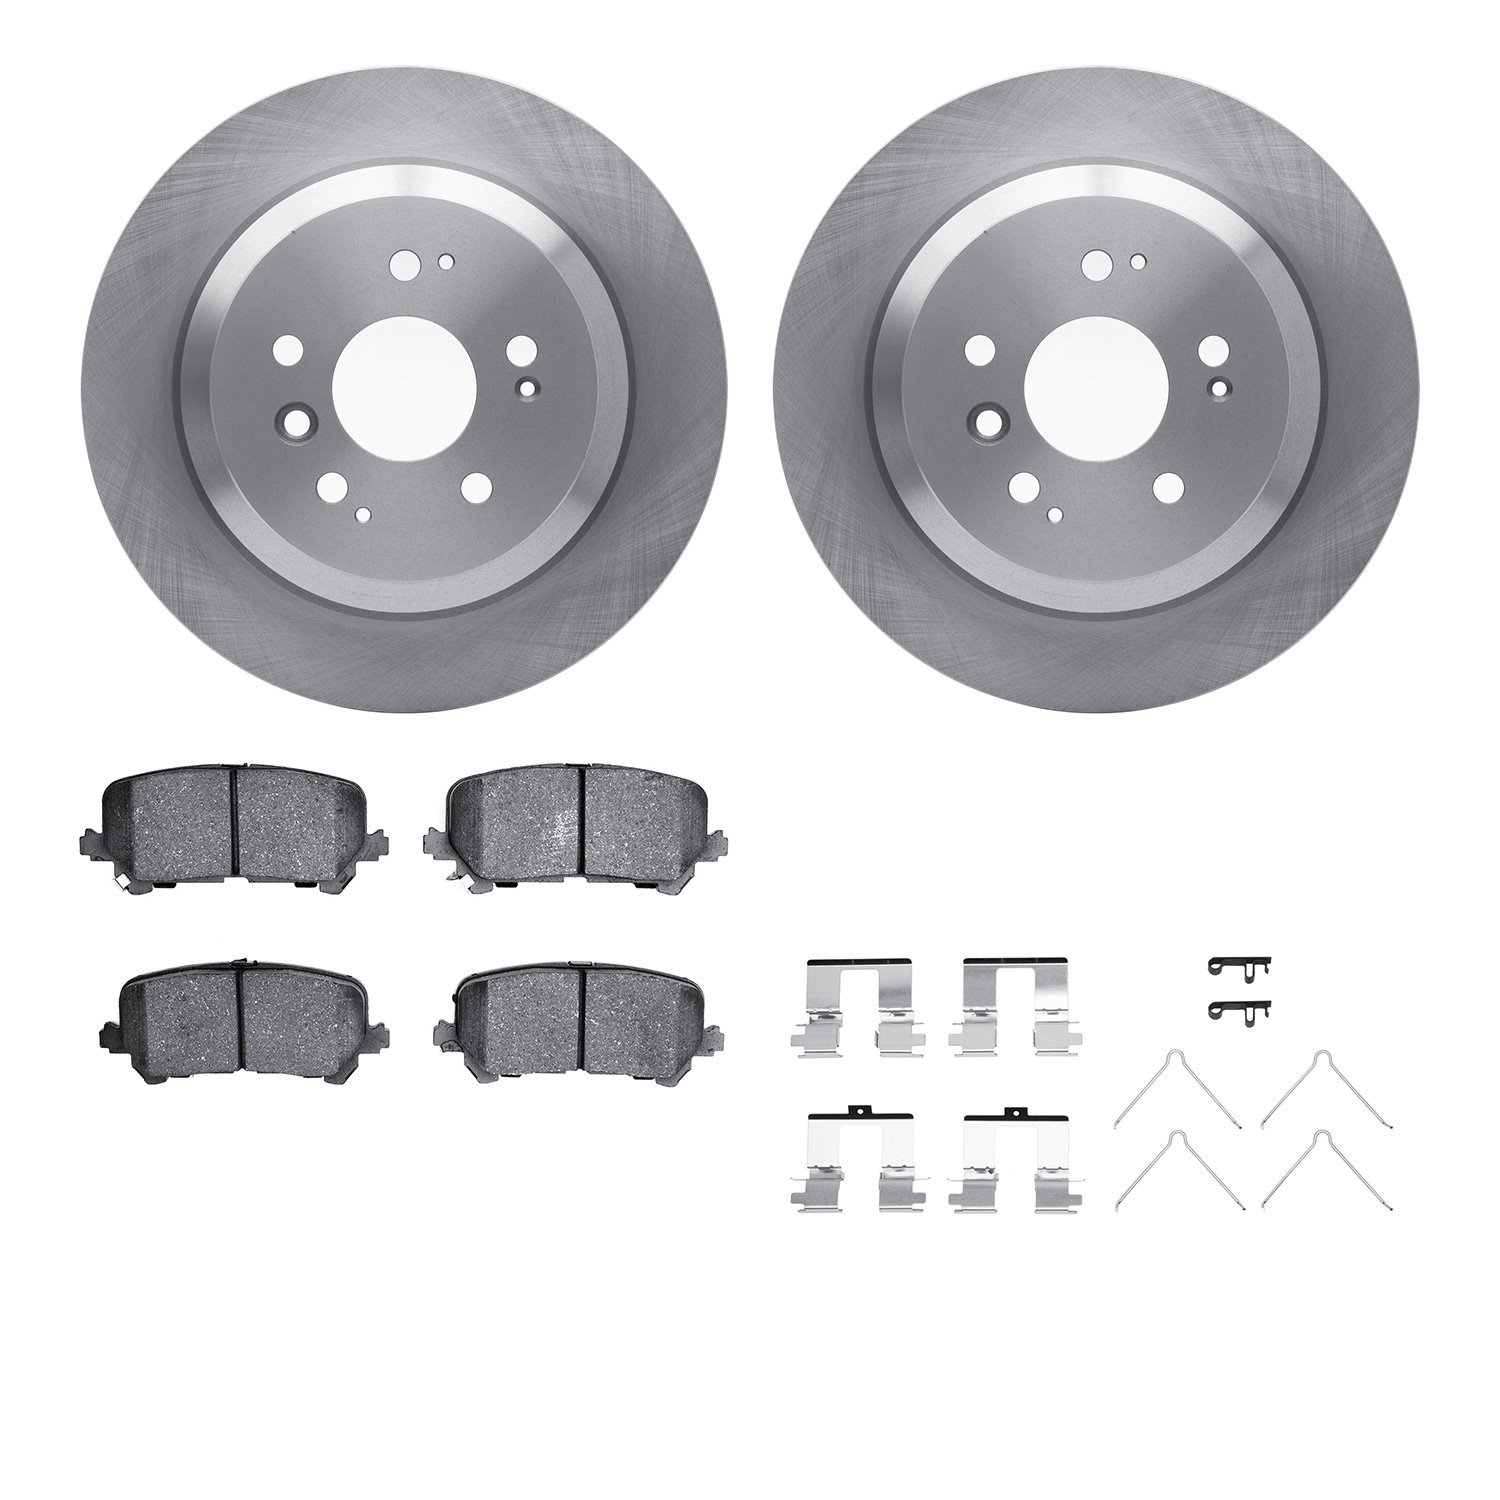 6312-59103 Brake Rotors with 3000-Series Ceramic Brake Pads Kit with Hardware, Fits Select Acura/Honda, Position: Rear